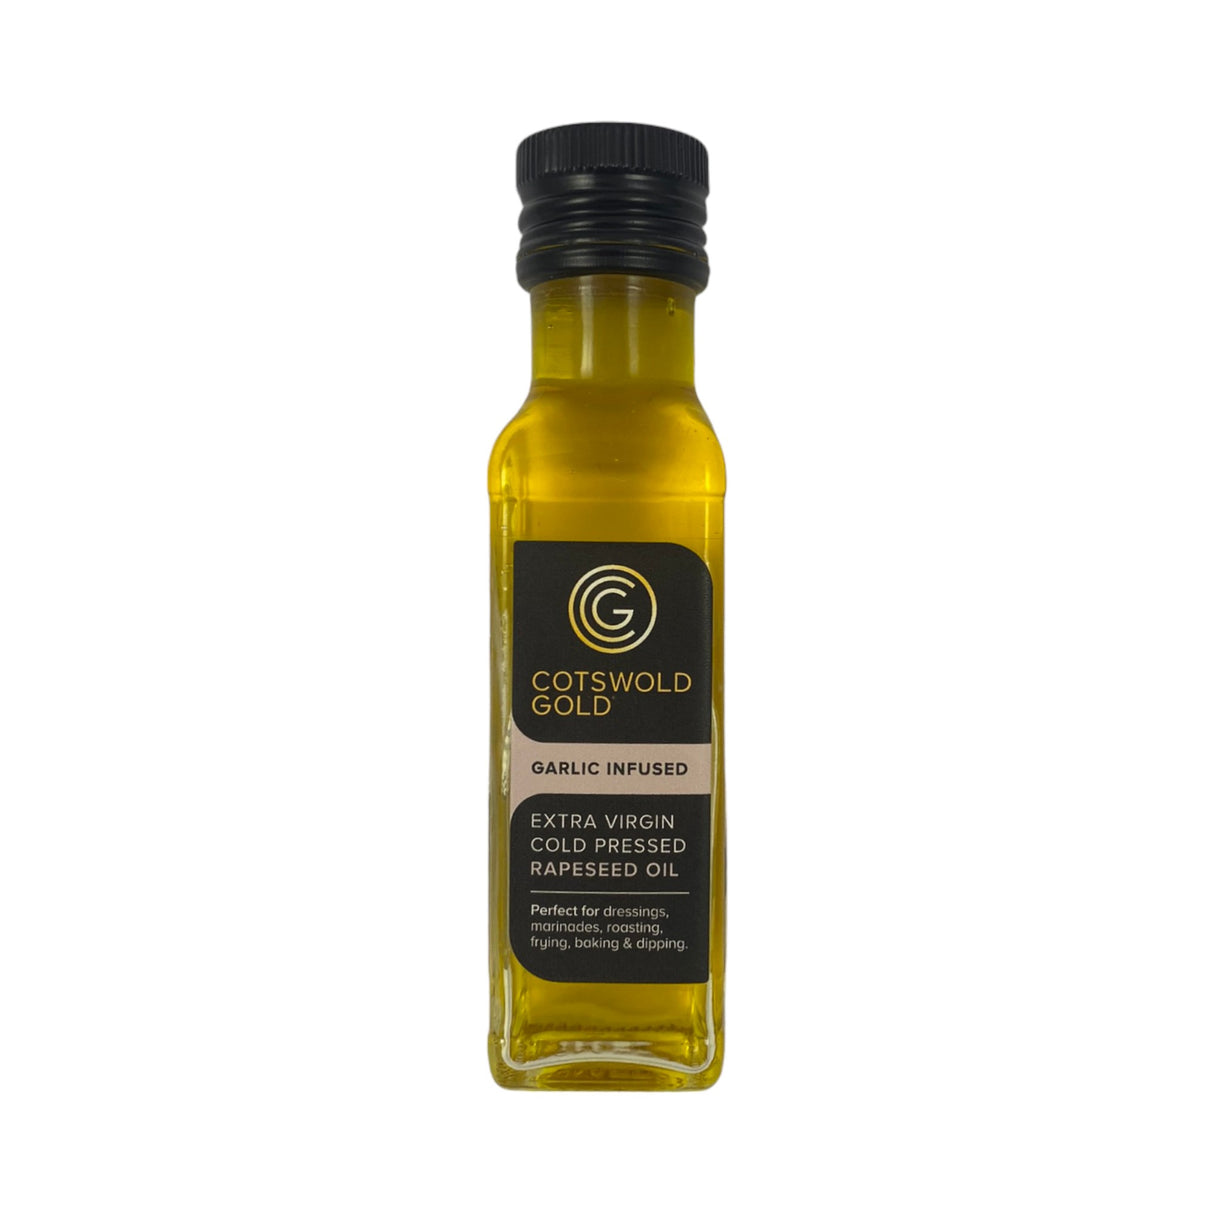 Cotswold Gold - Garlic Infused 100ml